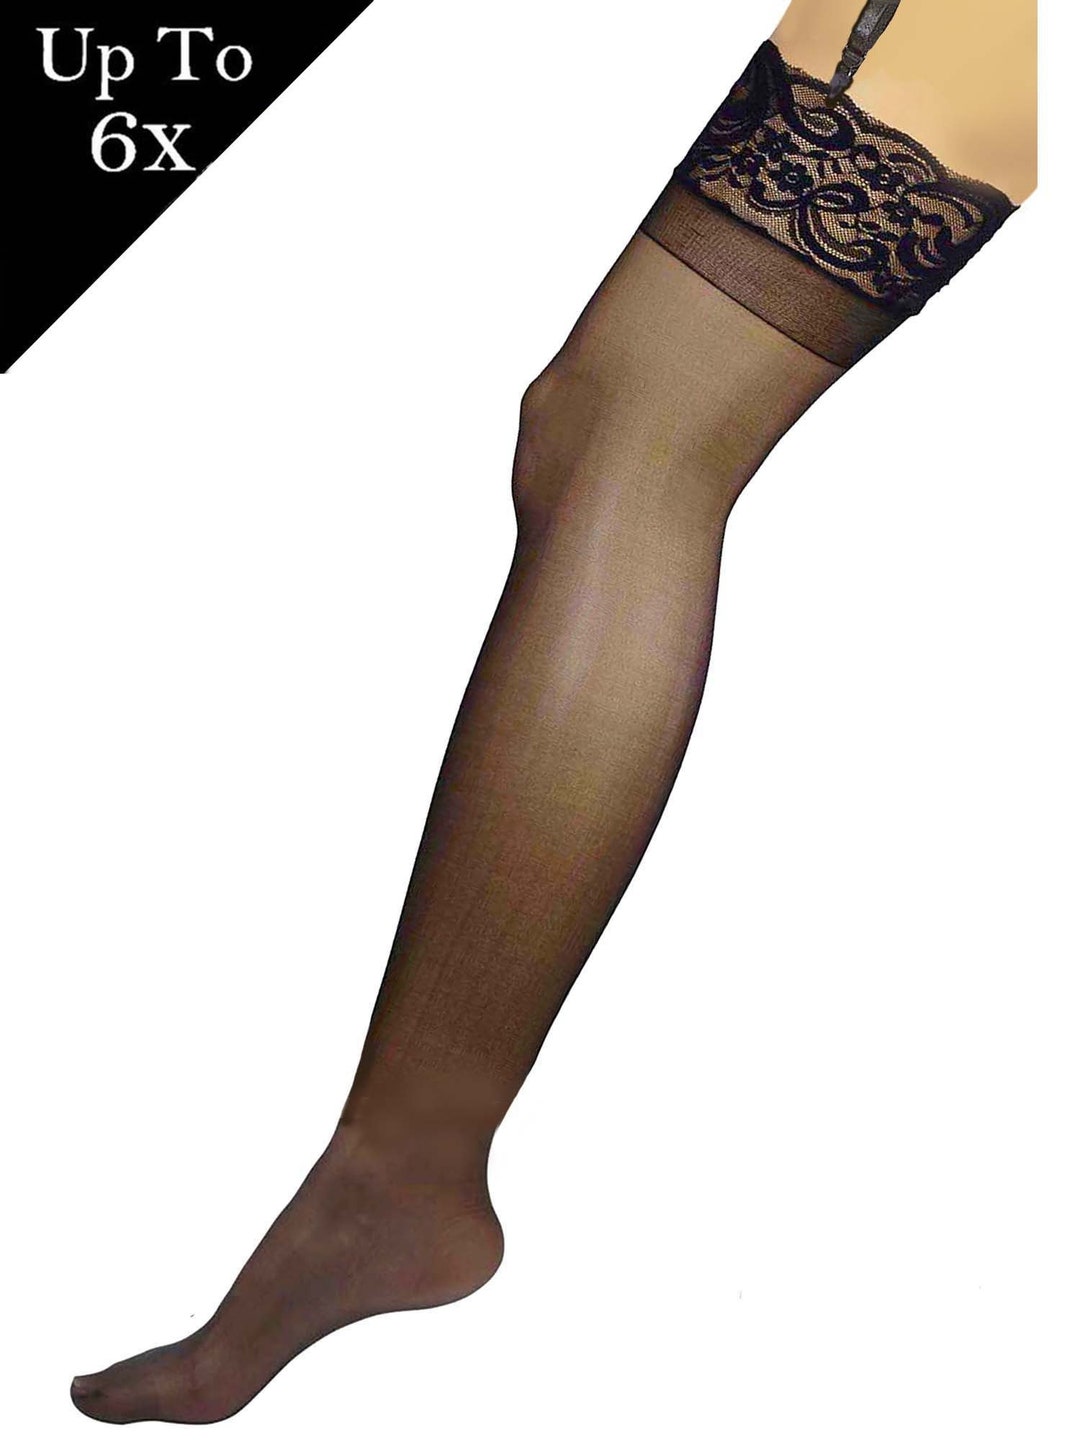 Angelique Women S Plus Size Hosiery Sheer Lace Top Black Thigh High Stockings For Garter Belts